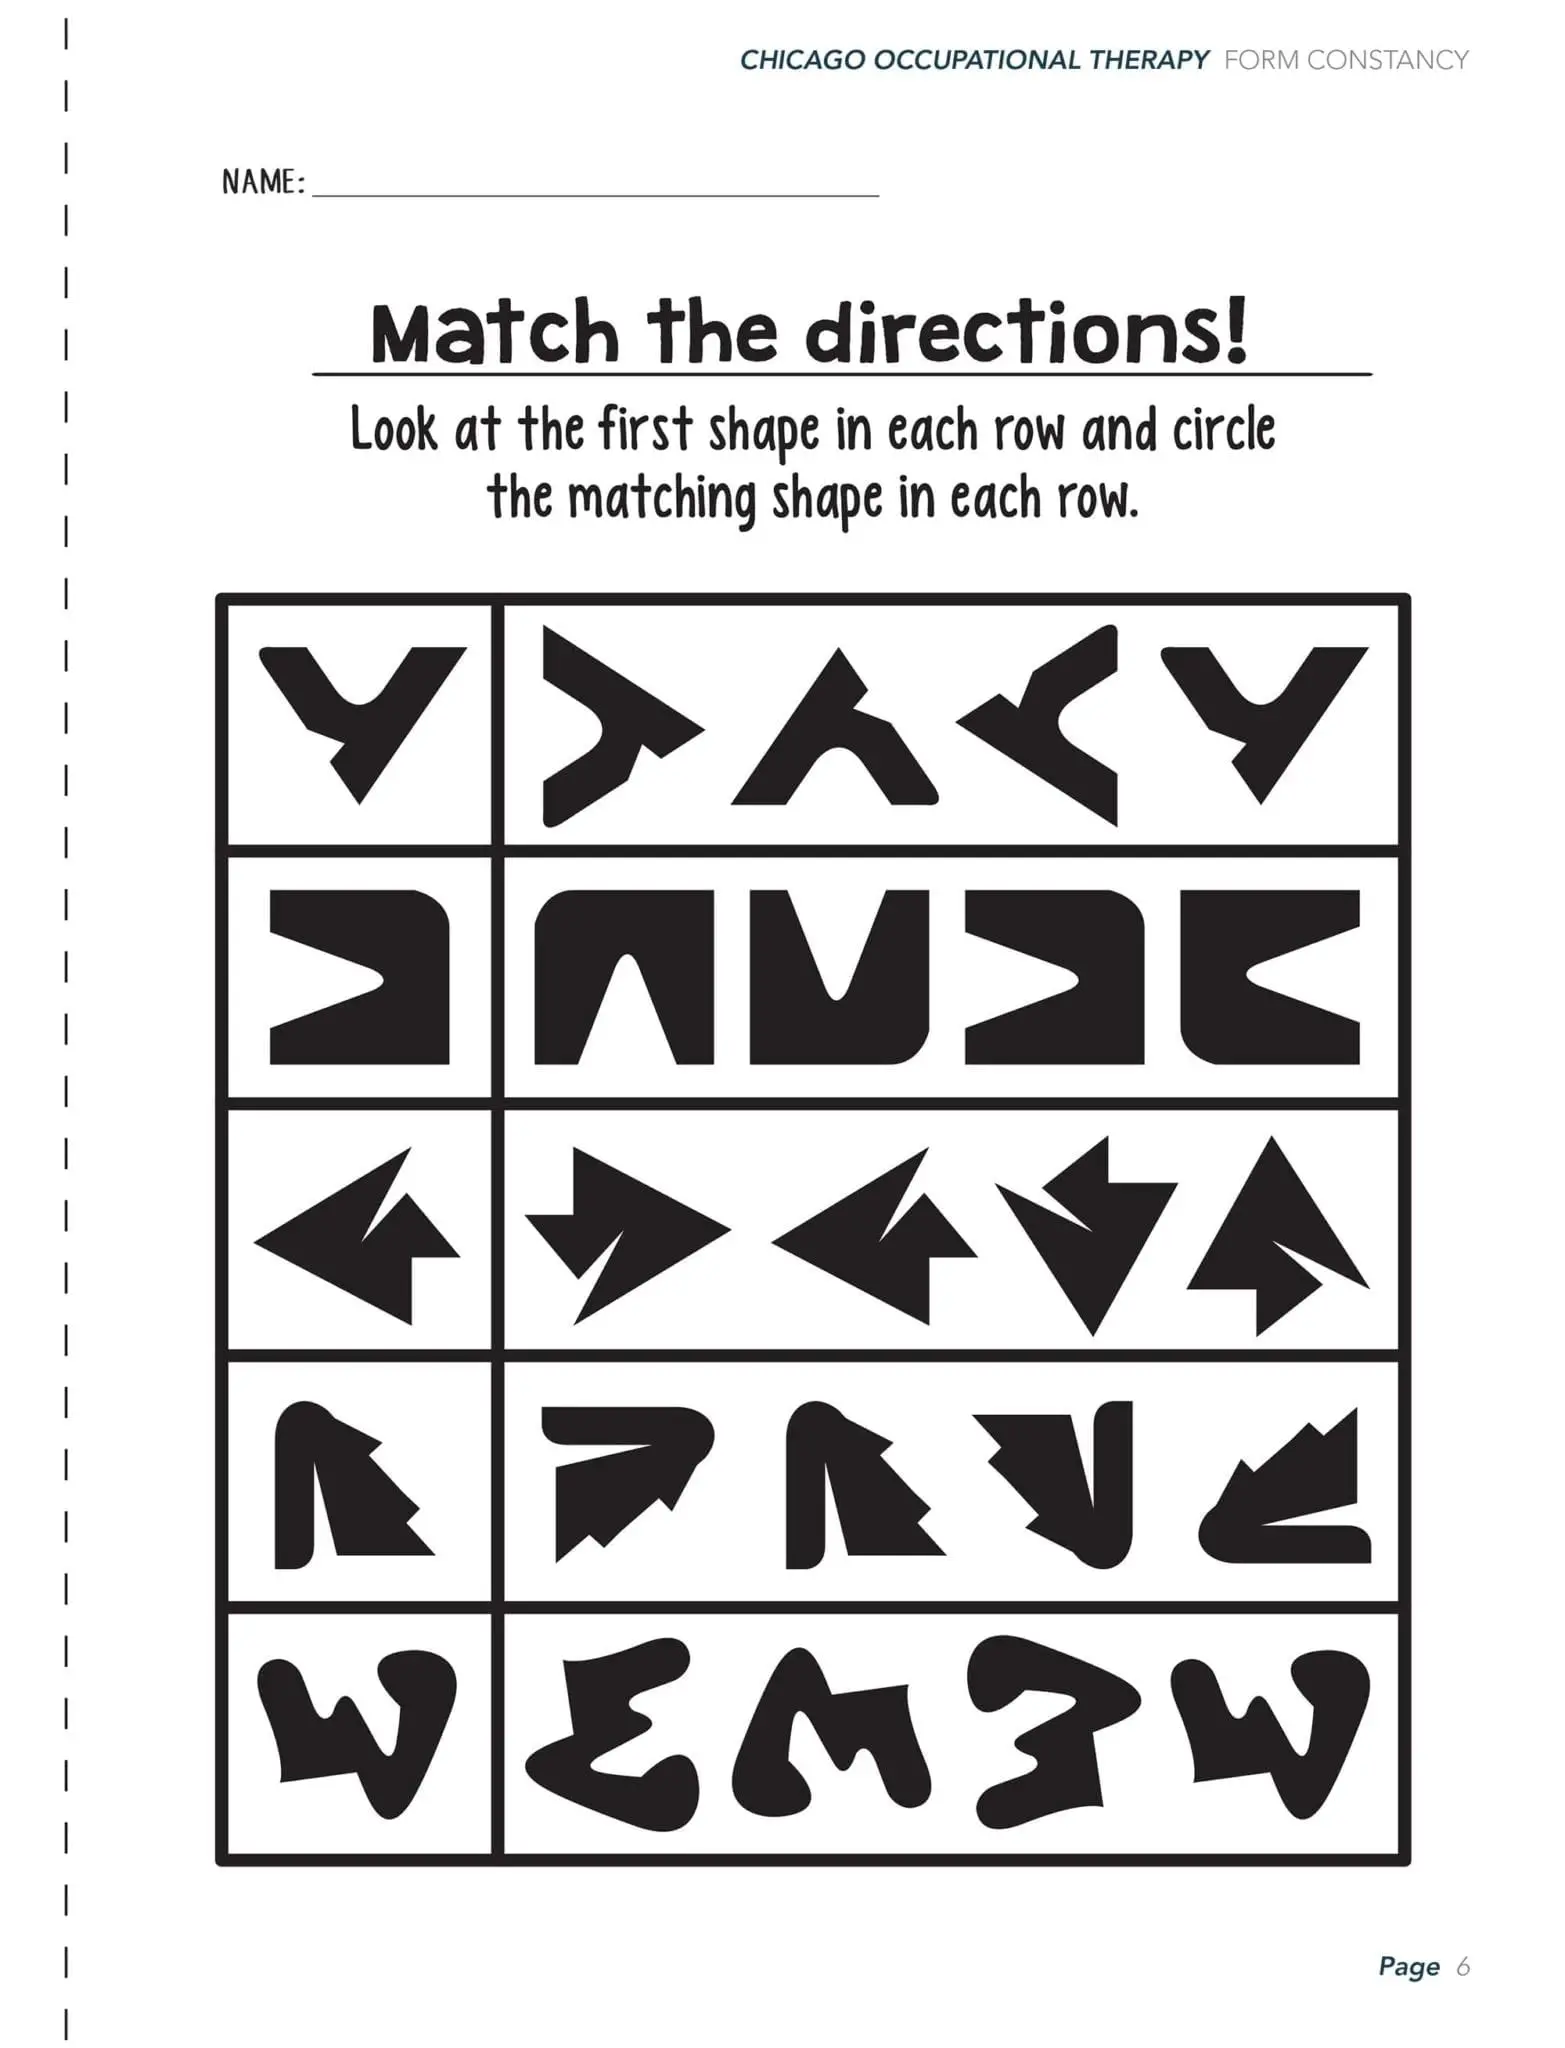 11-best-images-of-figure-ground-worksheets-to-print-free-printable